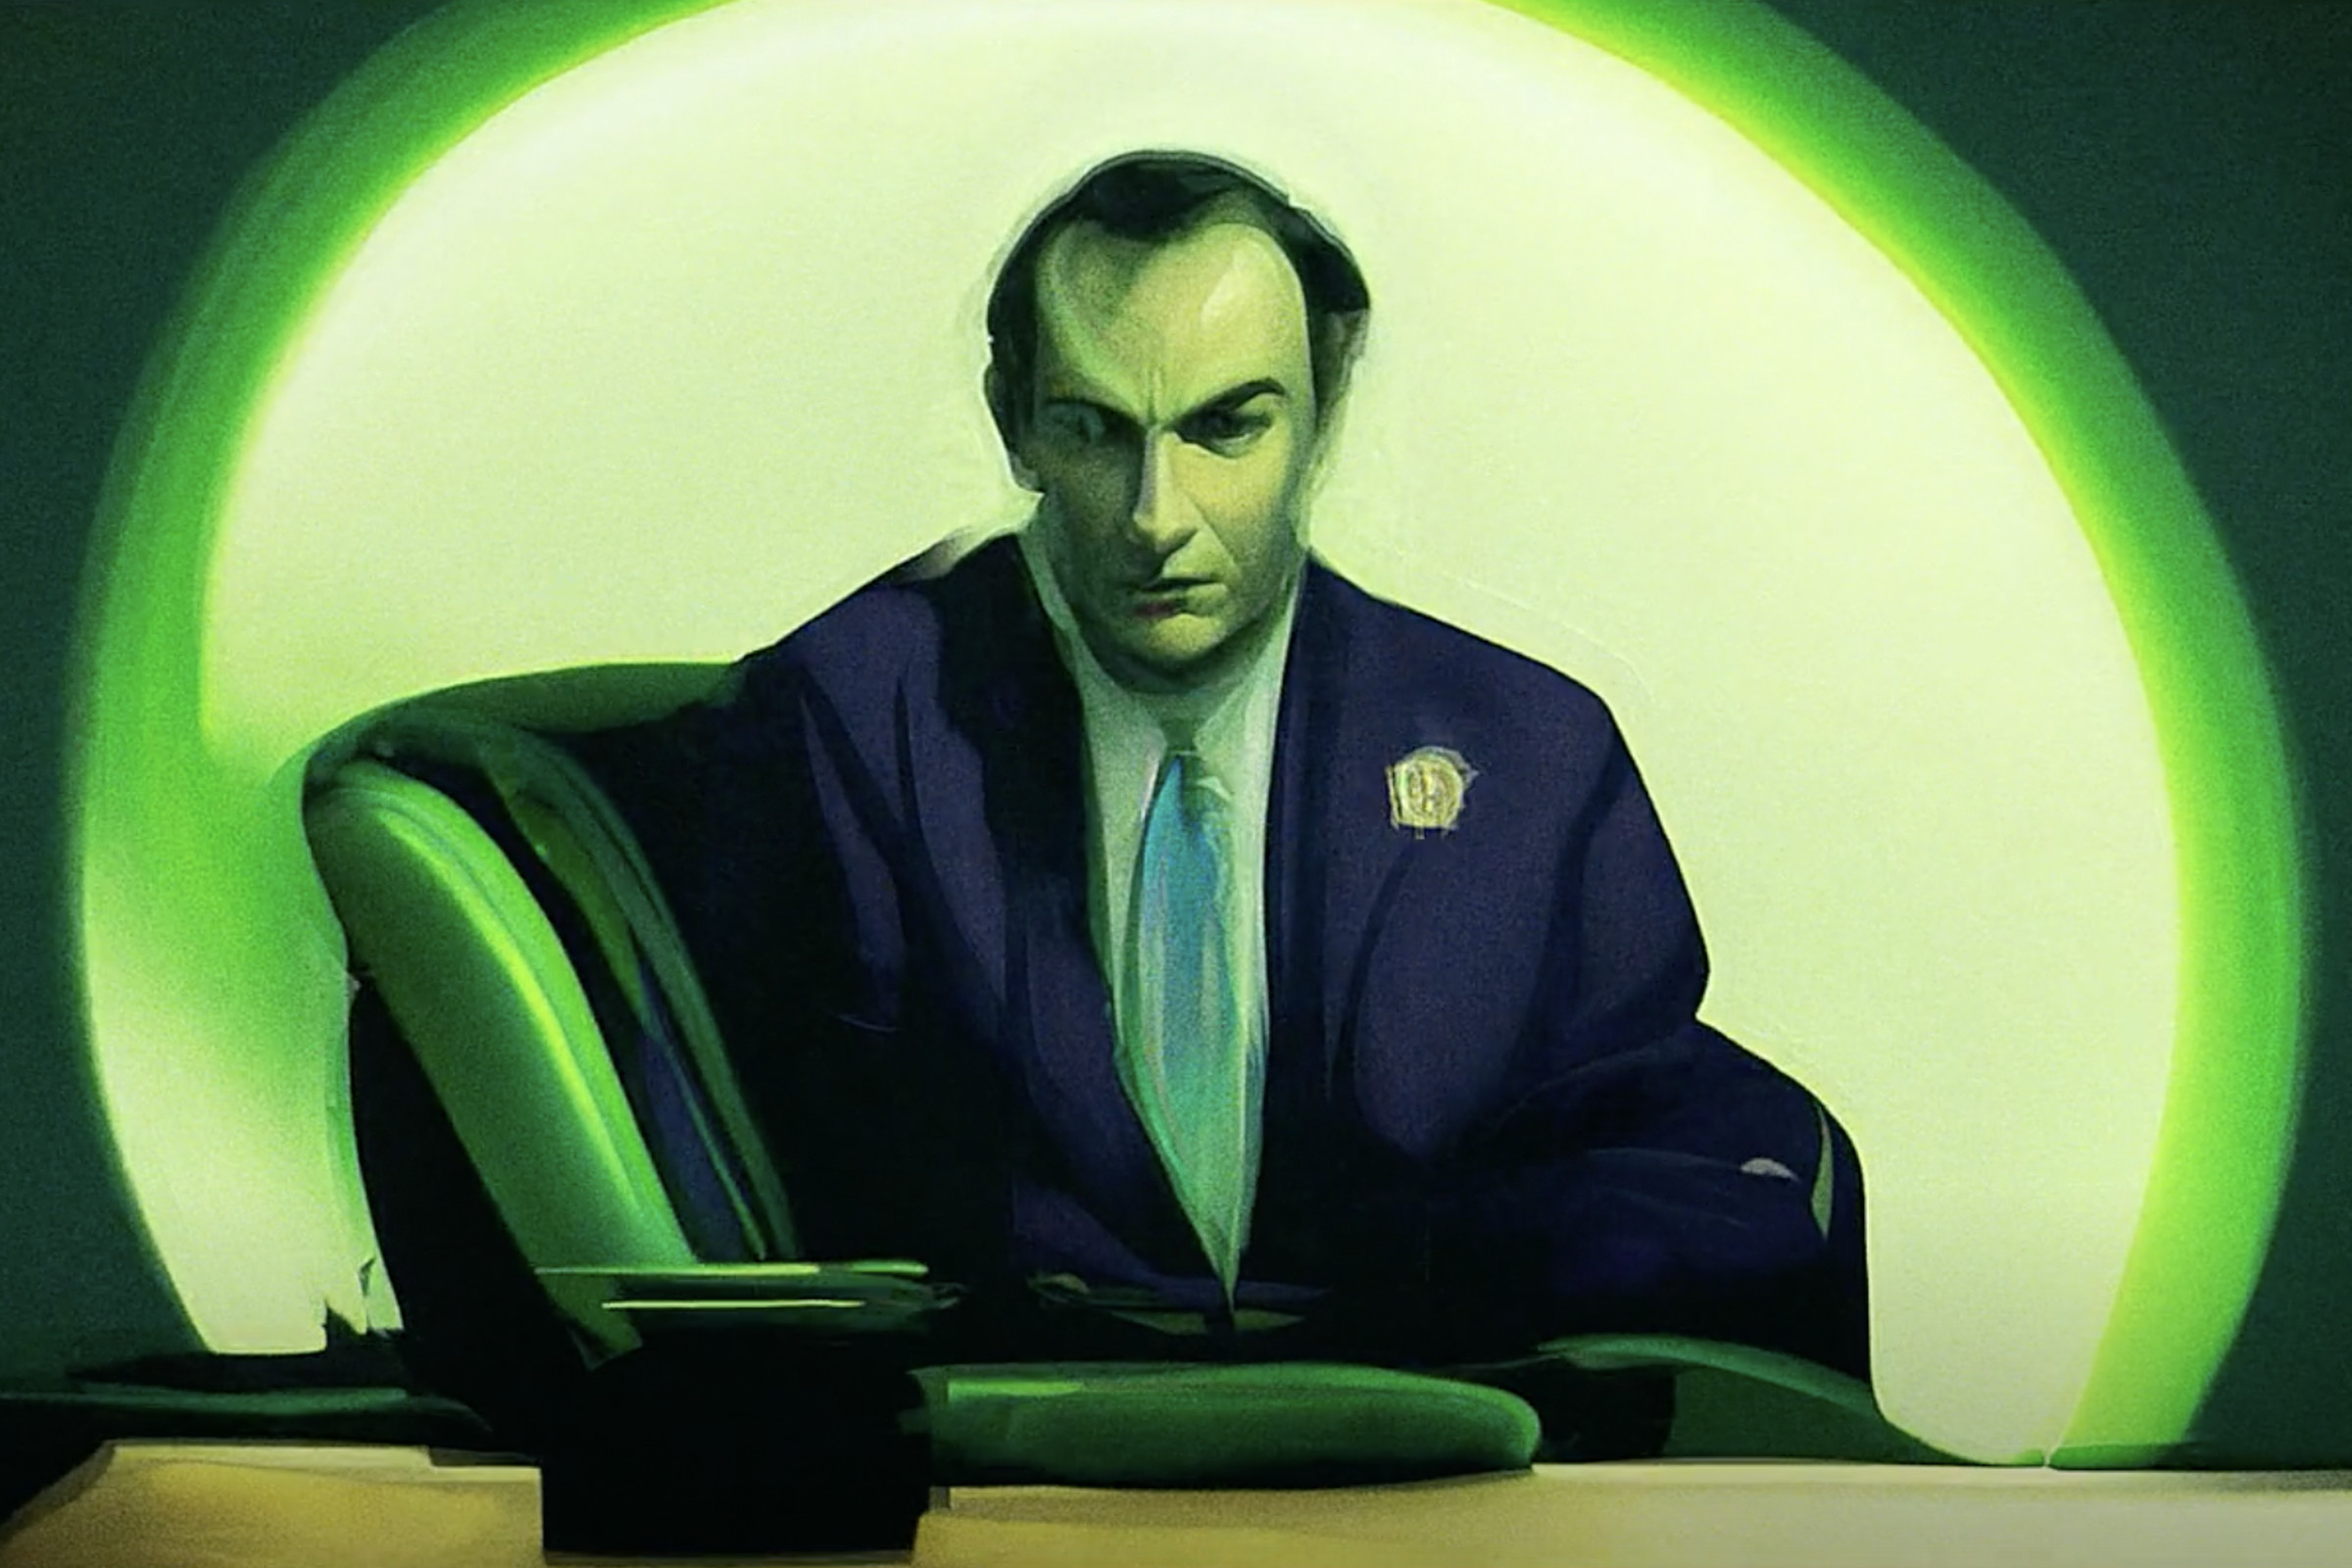 An ai-generated image meant to look like a green hued oil painting of a man with a smudged face wearing a blue suit and sitting as a desk.